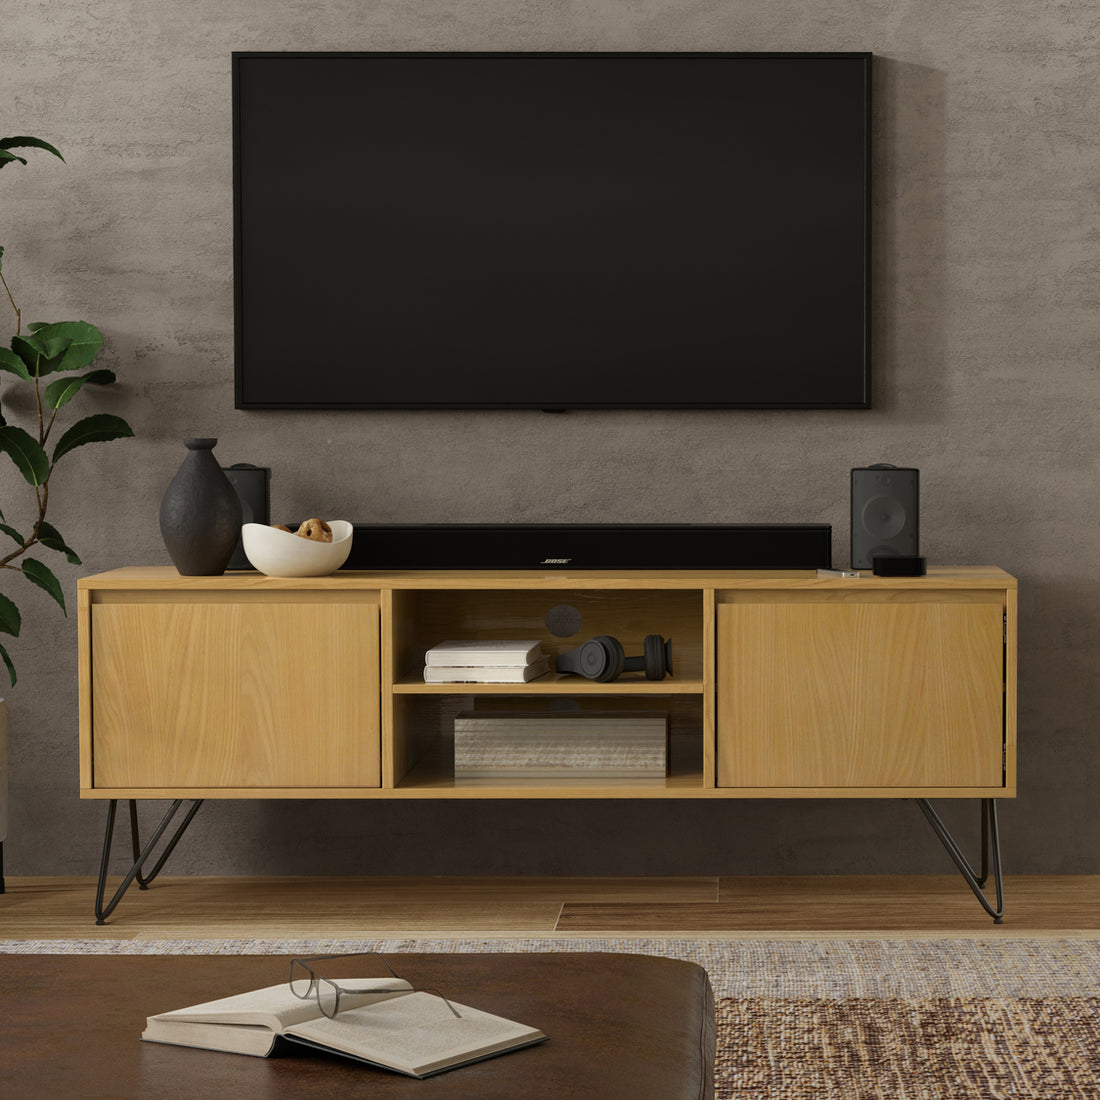 Veneer TV Stand for Blog Article